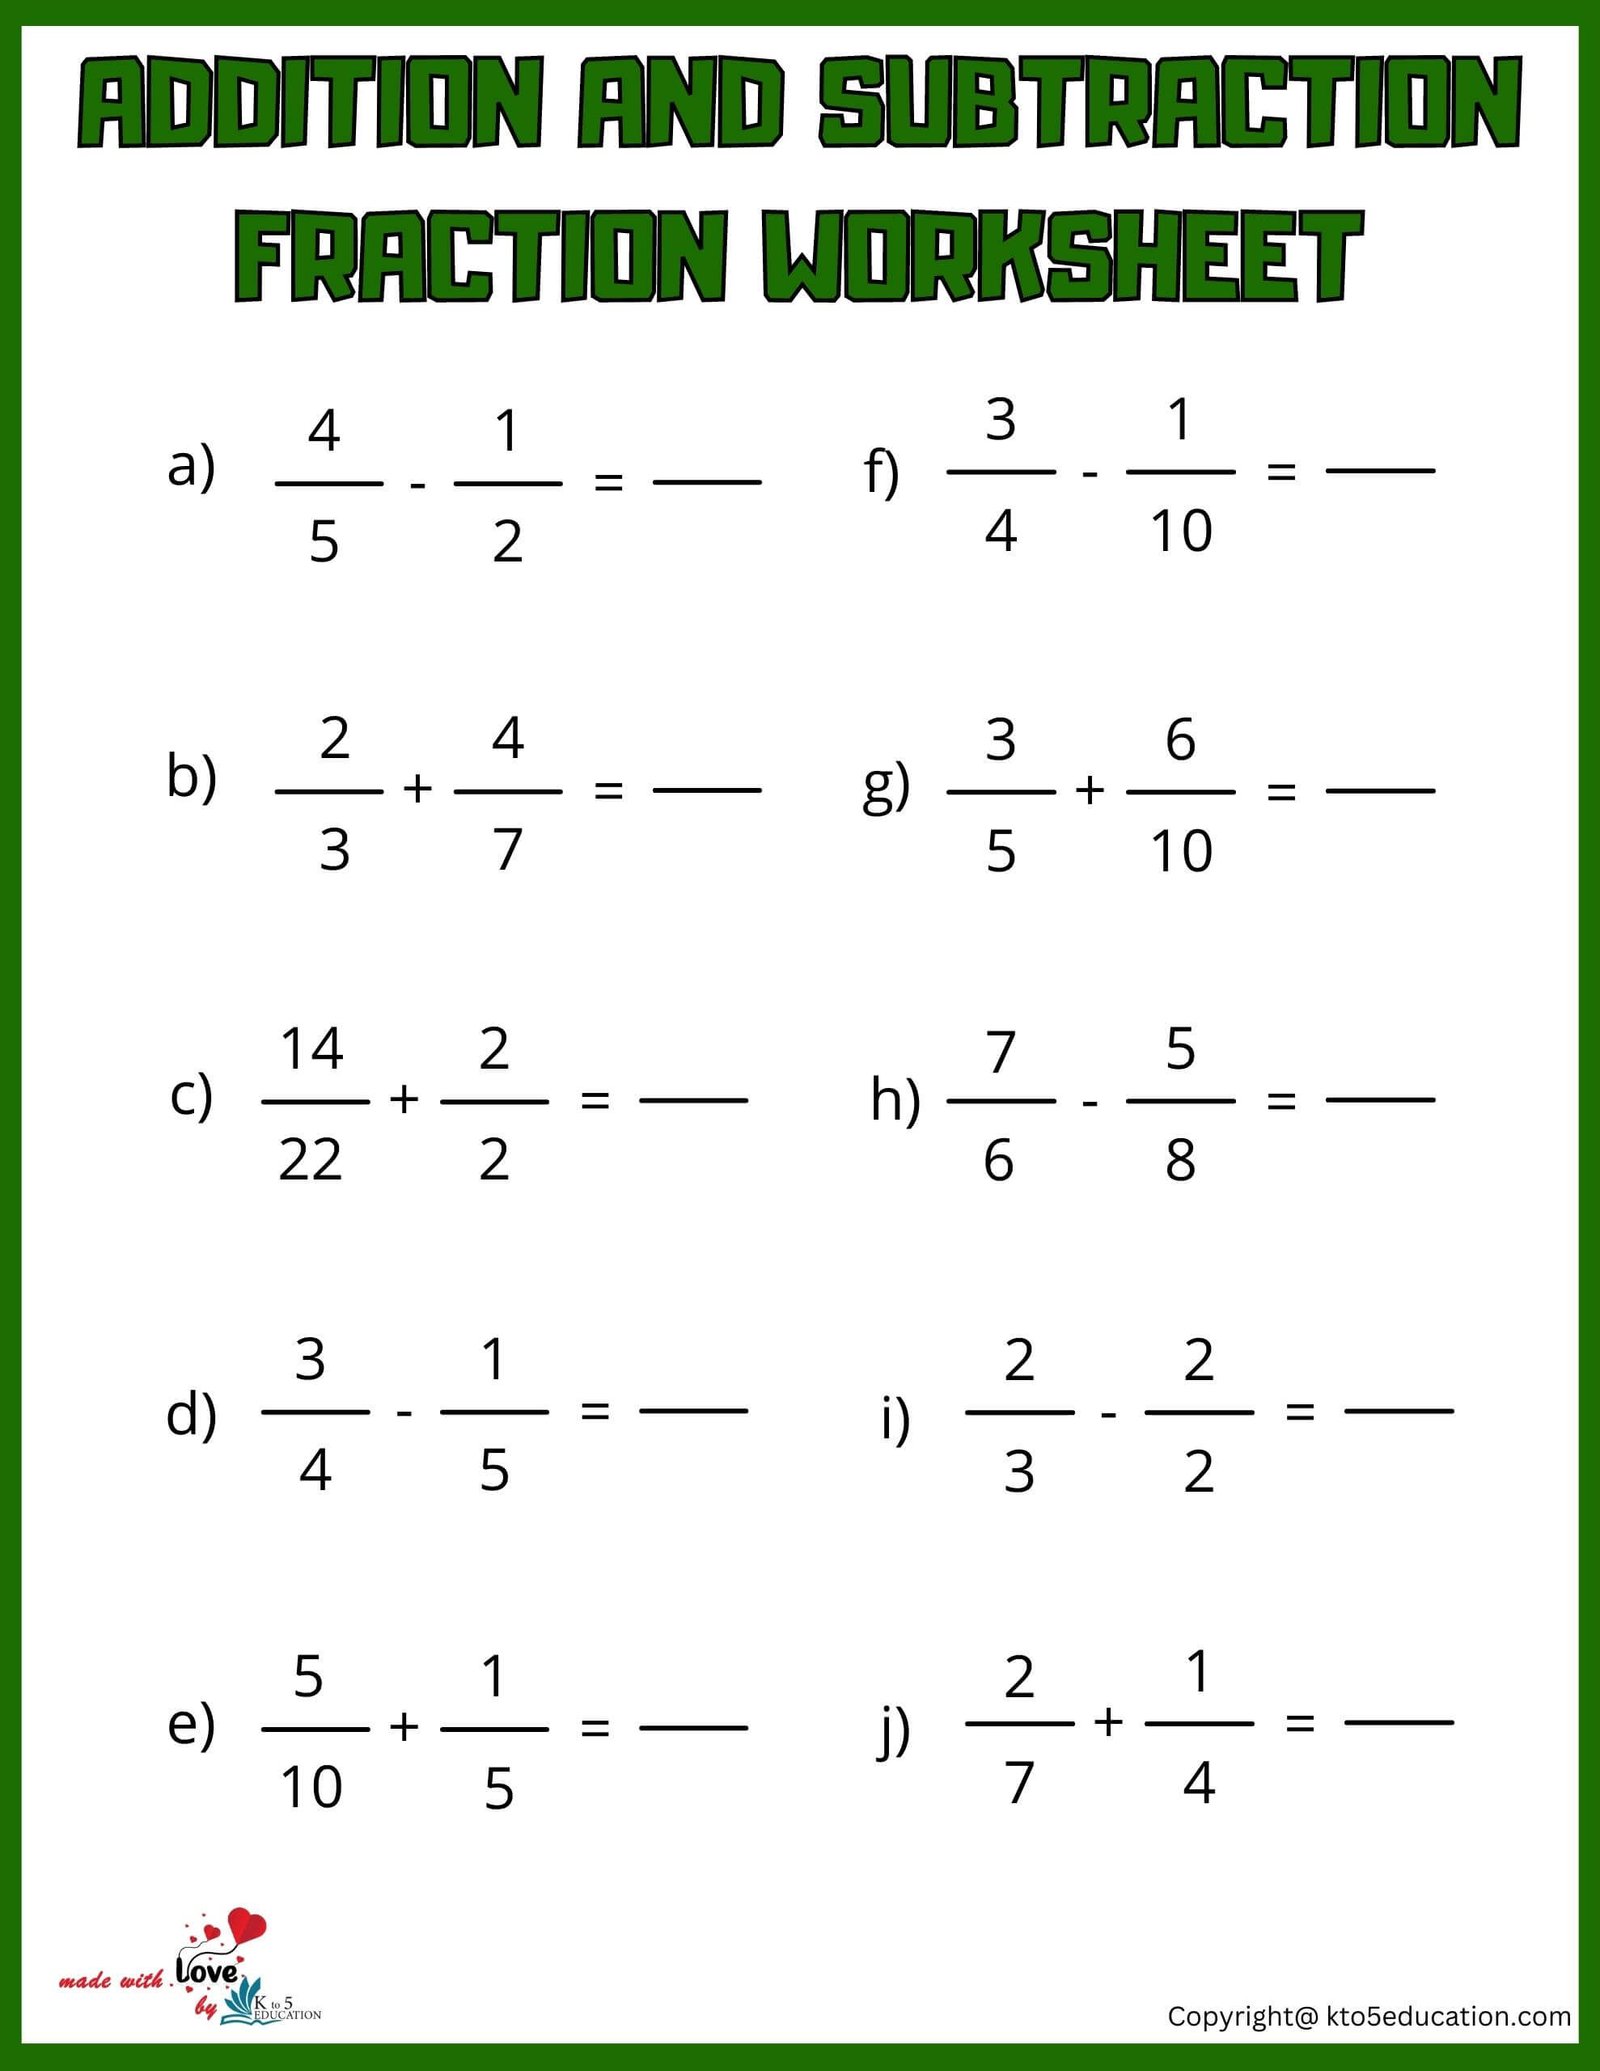 Adding And Subtracting Fraction Worksheet For Fourth Grade